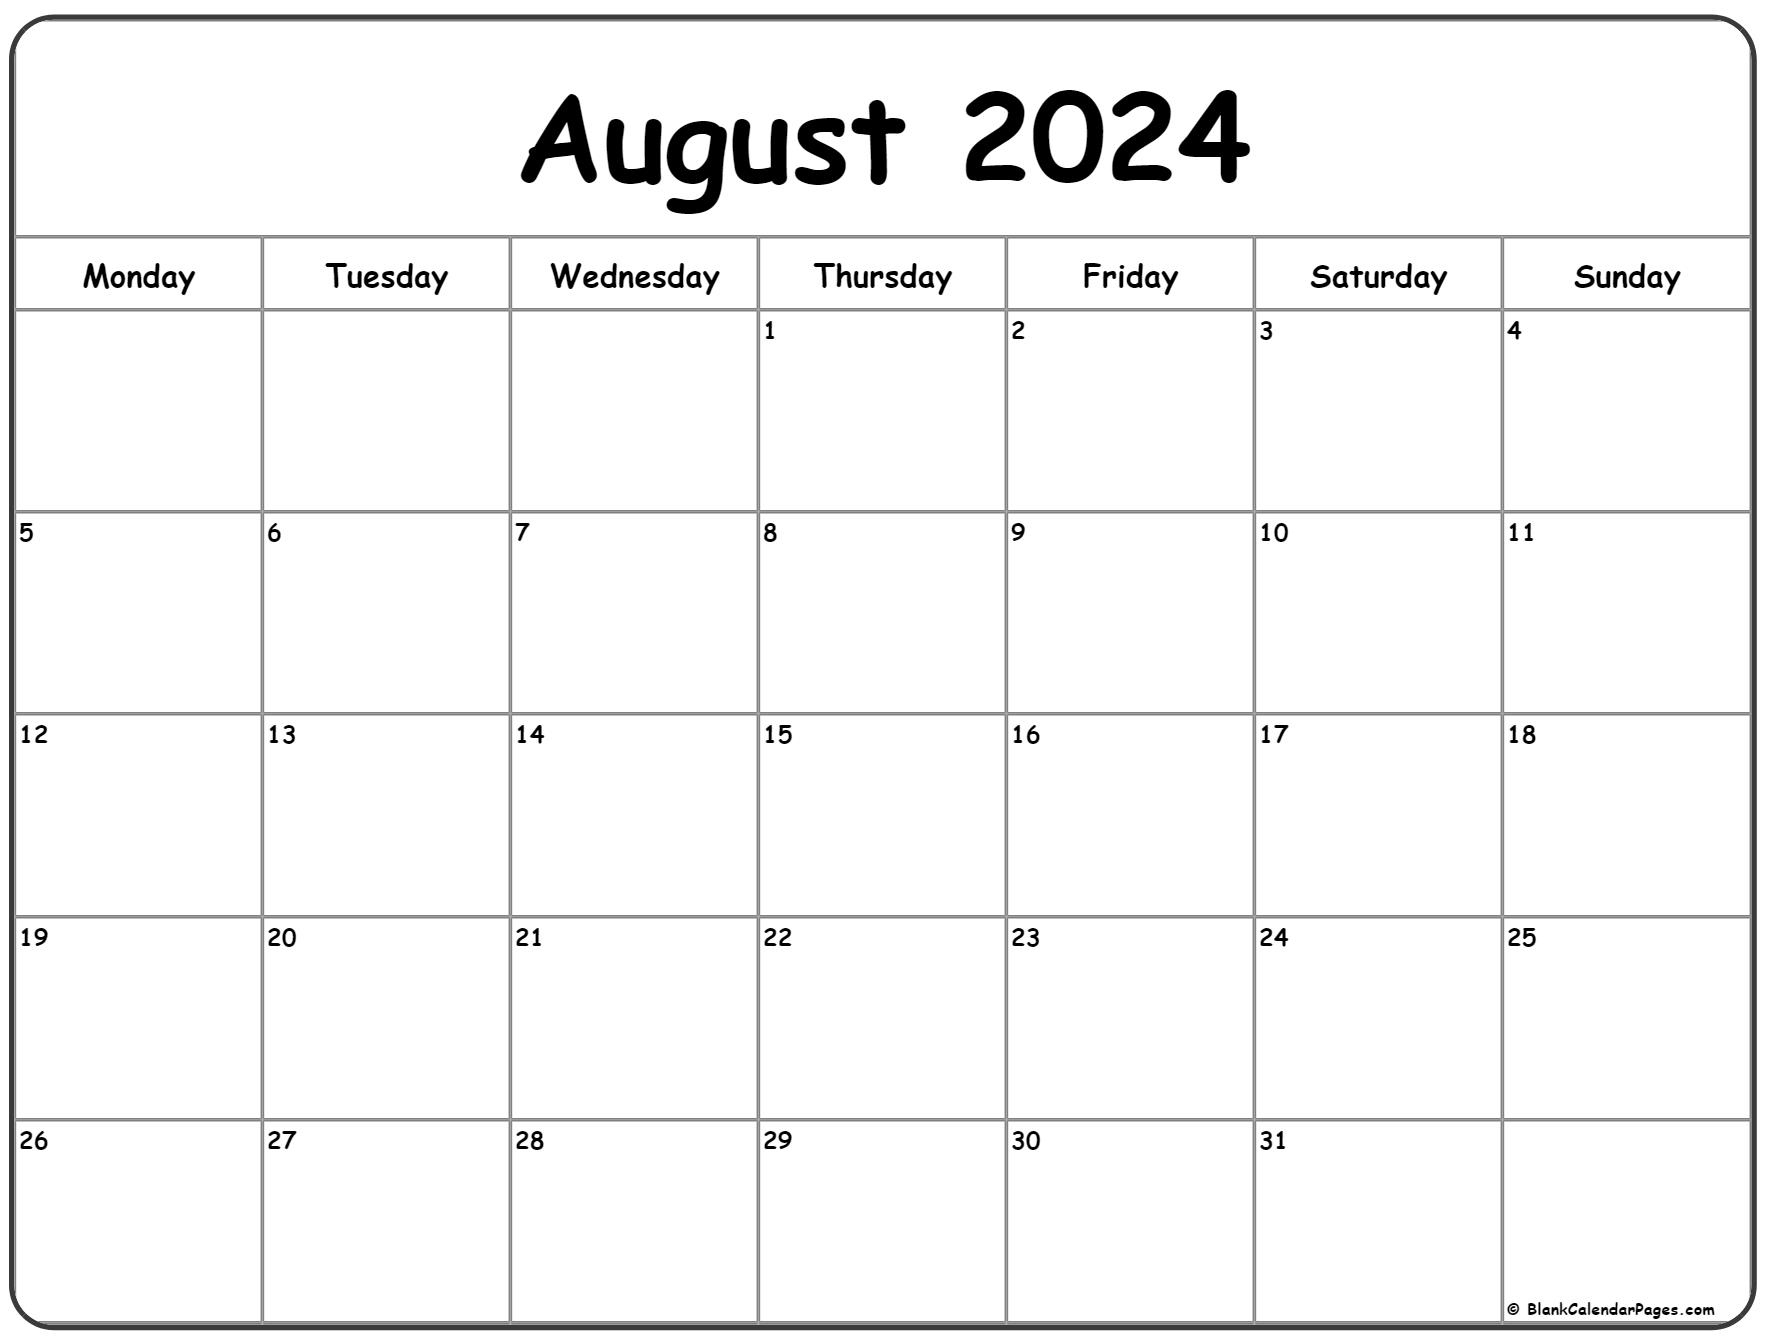 August 2024 Monday Calendar | Monday To Sunday intended for Free Printable August 2024 Calendar Canada